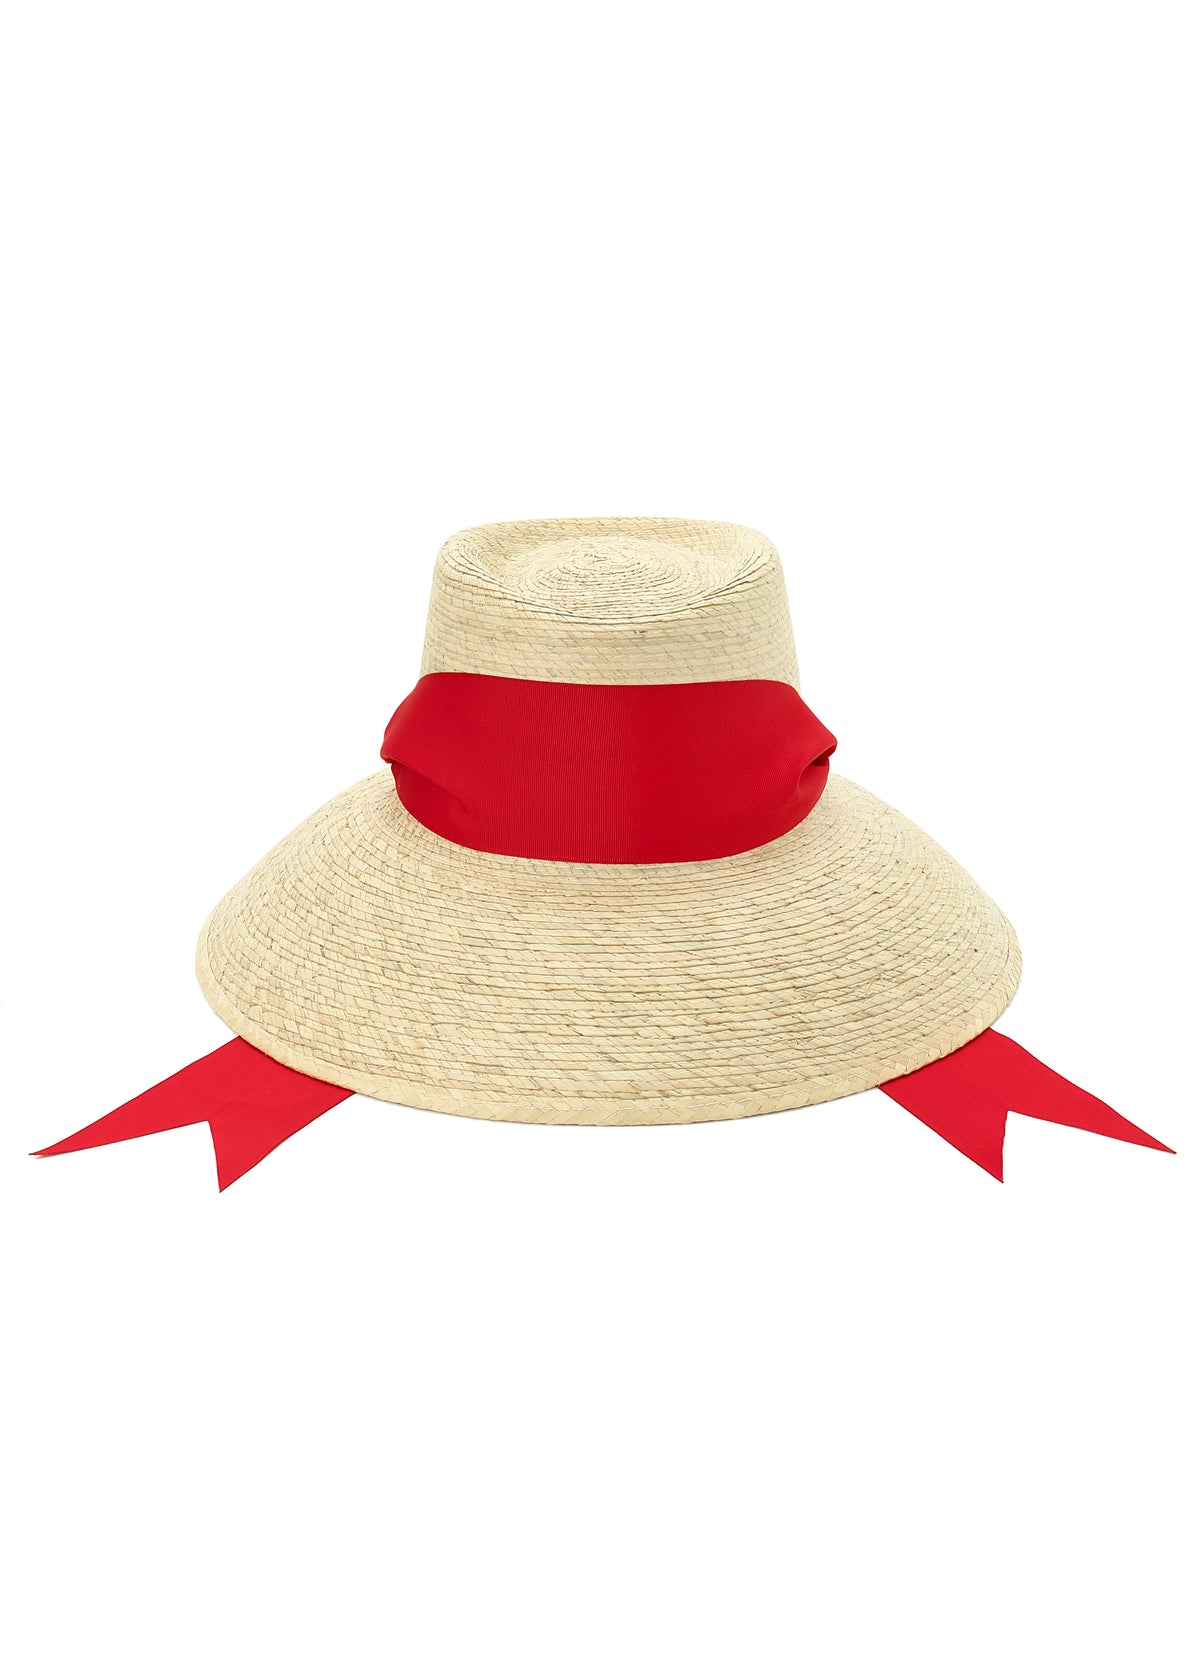 Wildflower Sun Hat With Wide Red Grosgrain Ribbon